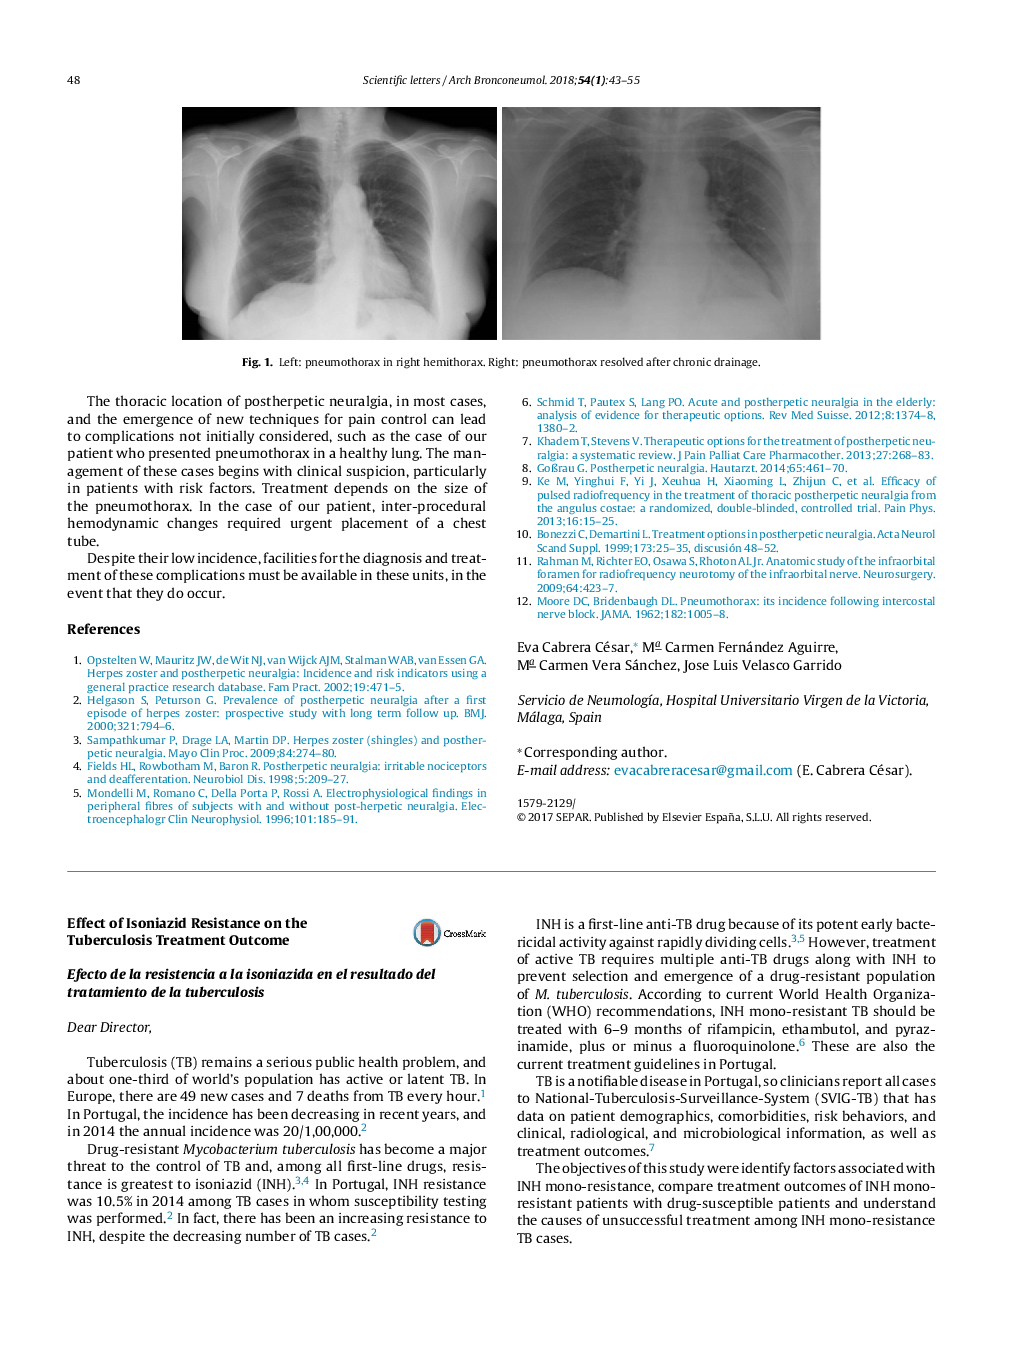 Effect of Isoniazid Resistance on the Tuberculosis Treatment Outcome